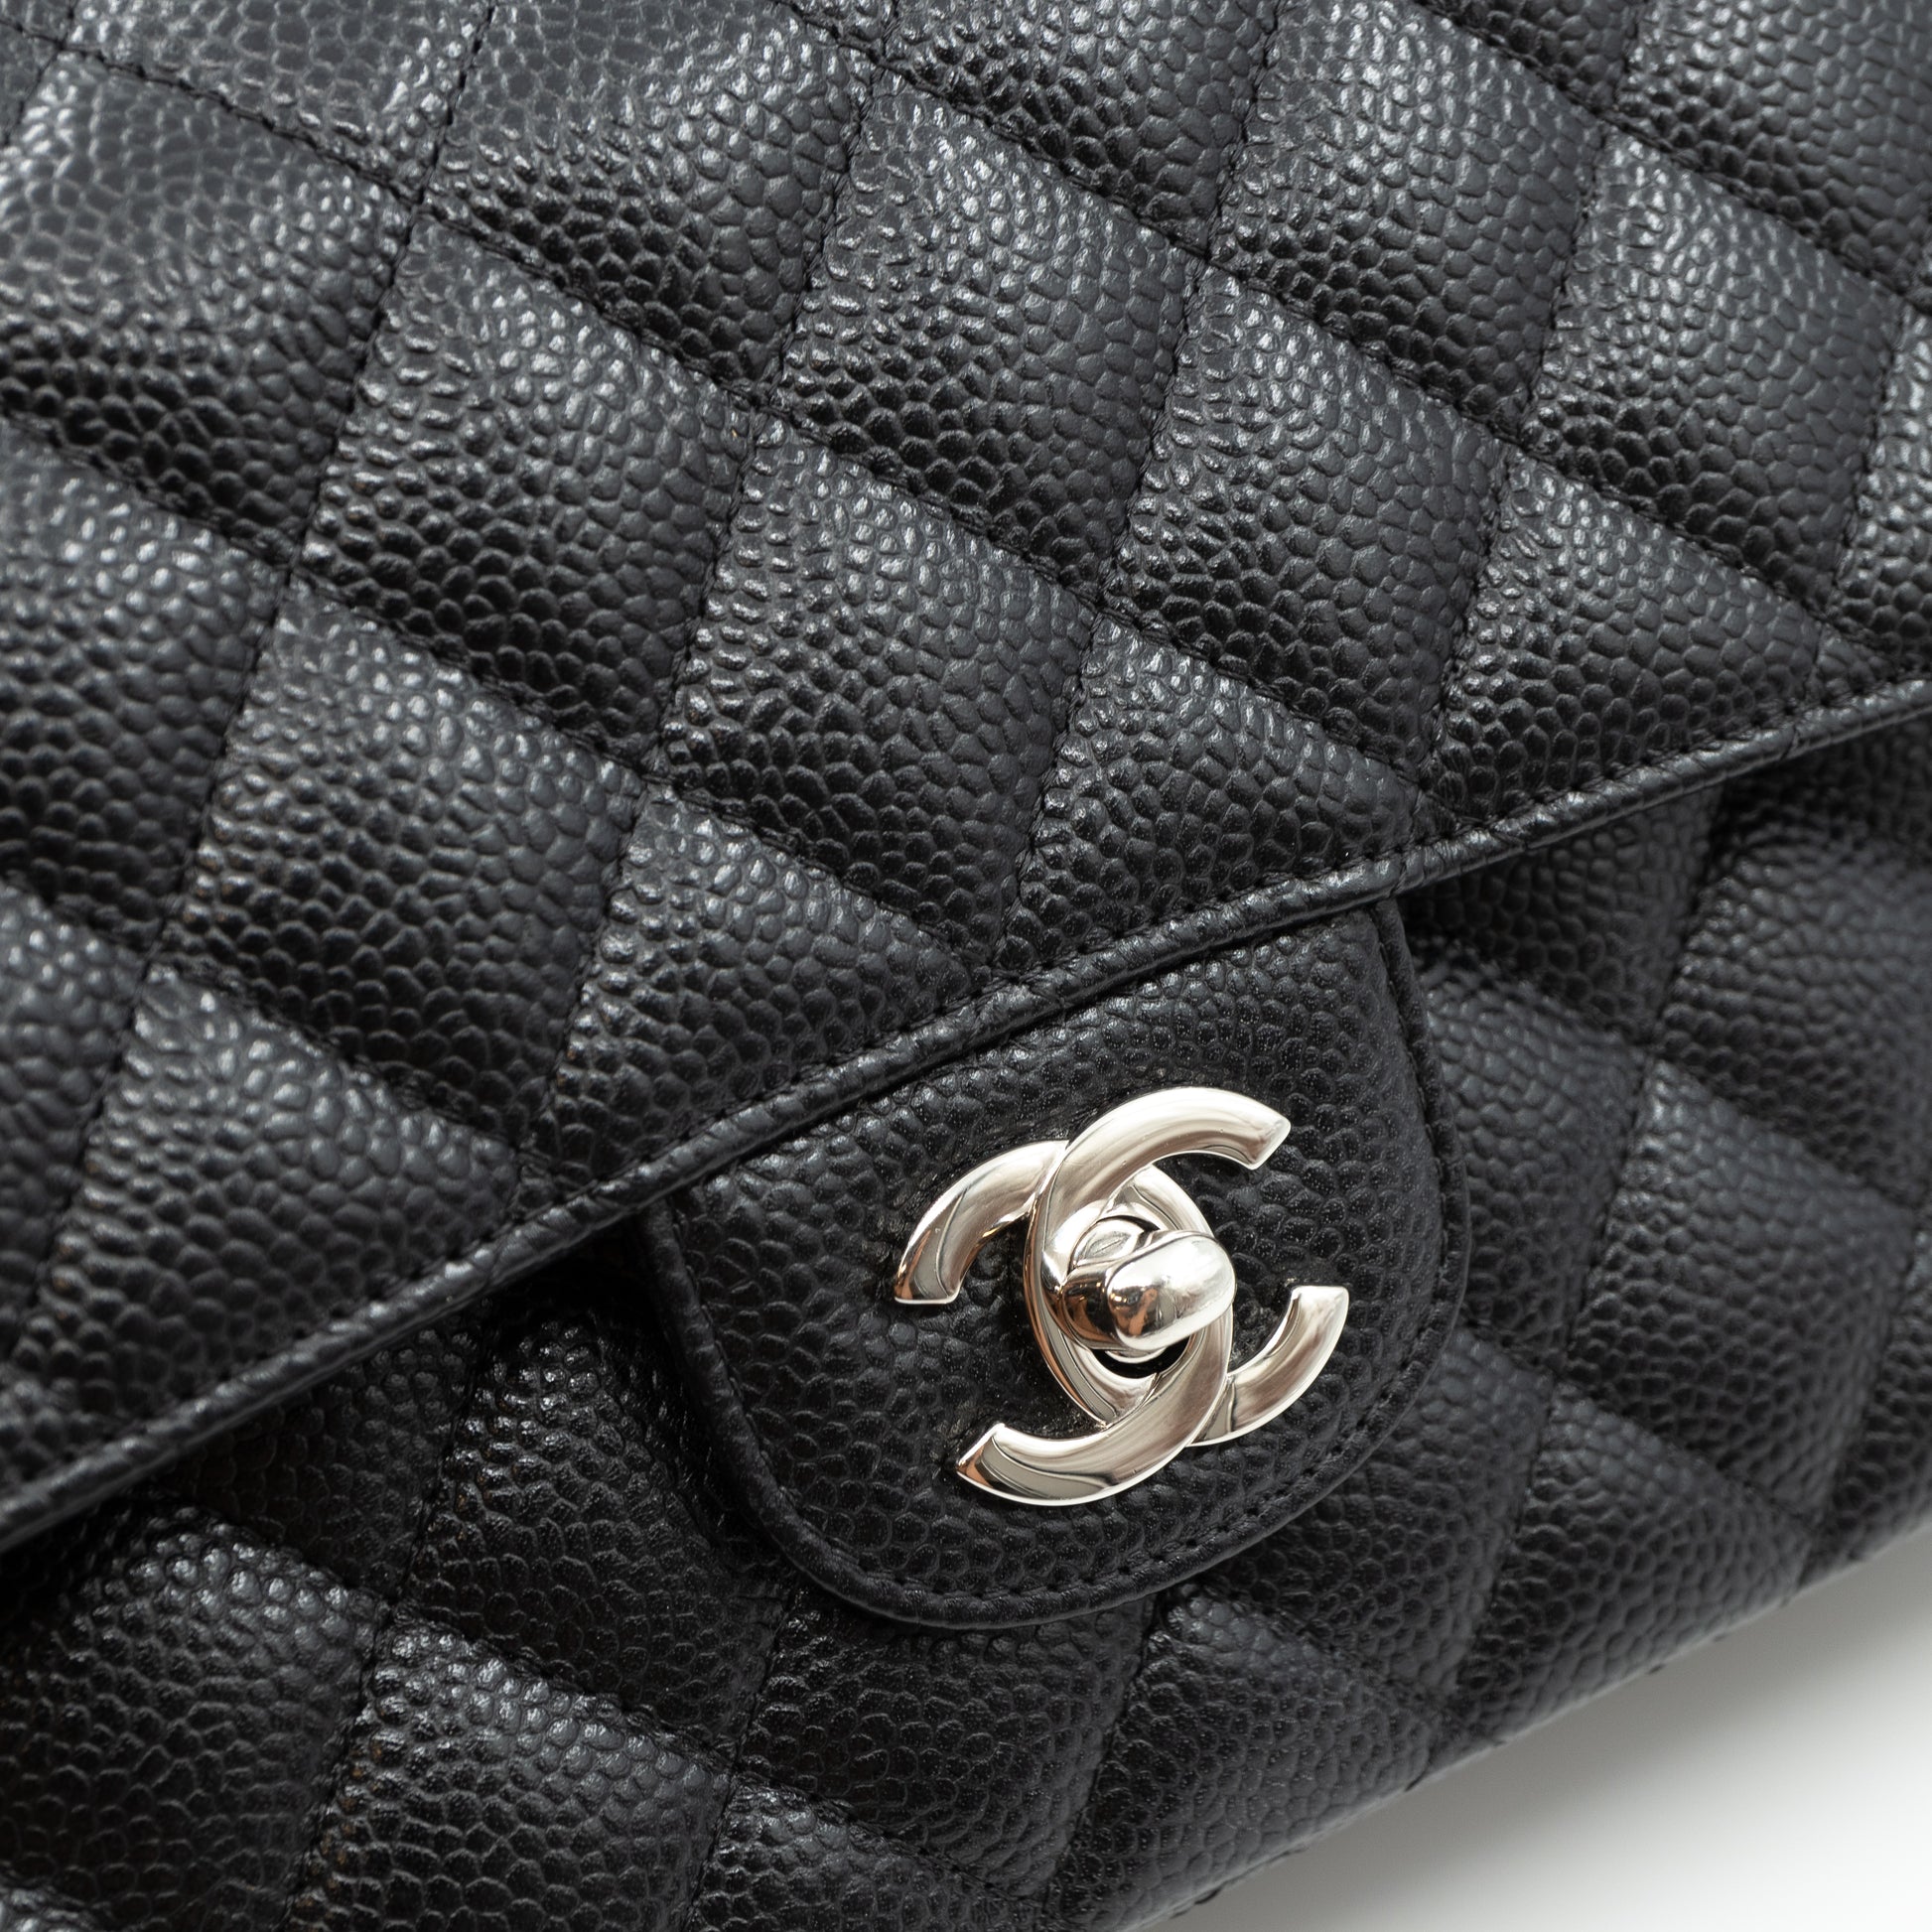 Vintage Chanel Classic Flap - 264 For Sale on 1stDibs